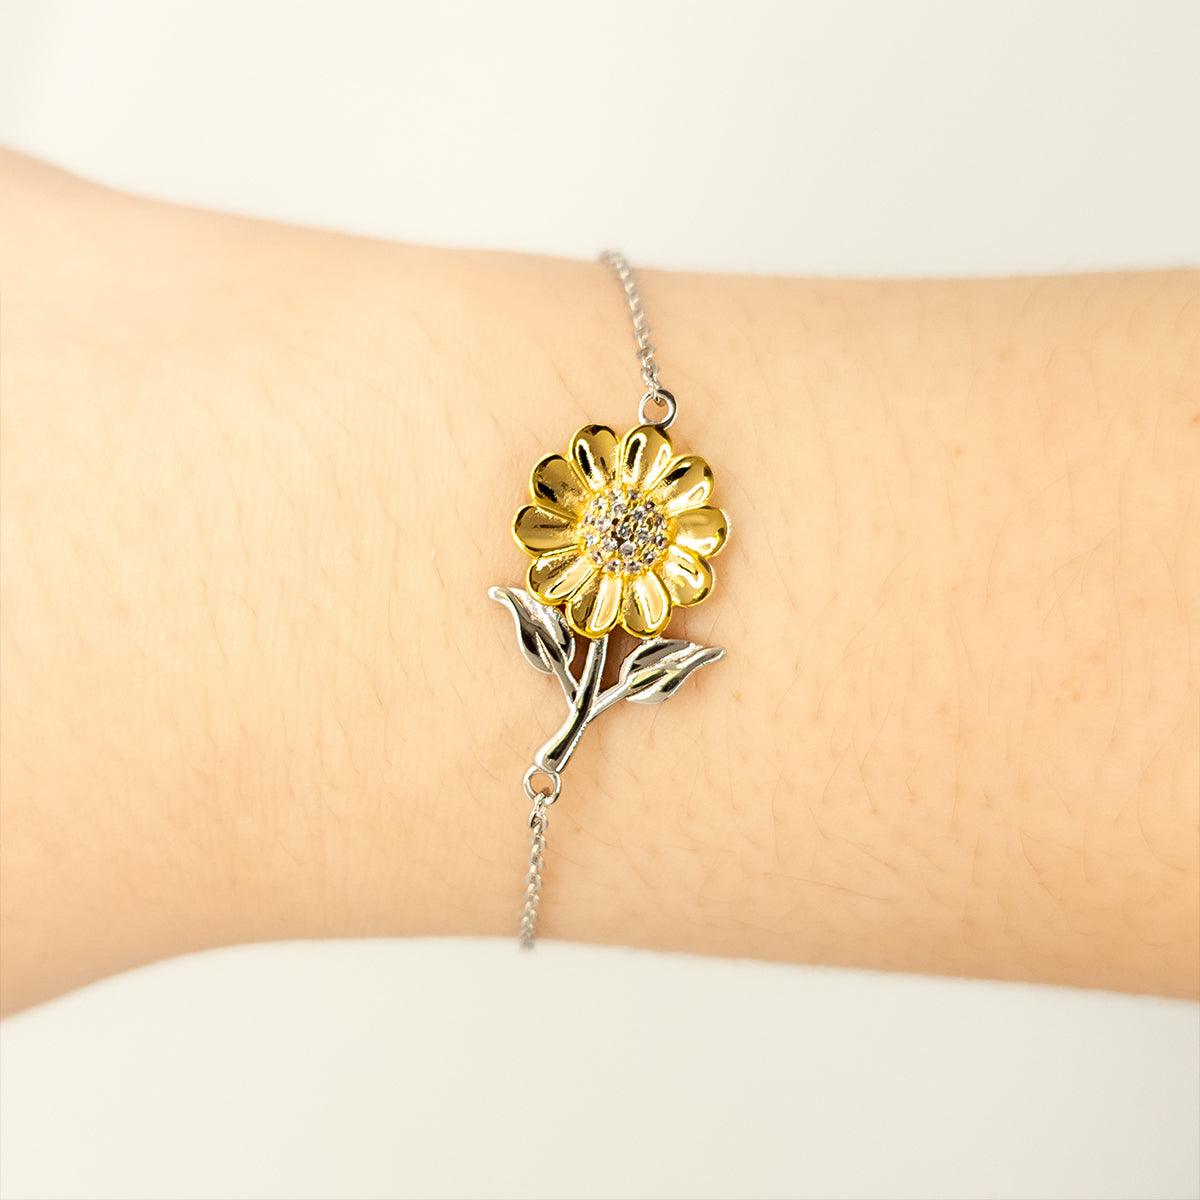 Sarcastic Chiropractor Sunflower Bracelet Gifts, Christmas Holiday Gifts for Chiropractor Birthday Message Card, Chiropractor: Because greatness is woven into the fabric of every day, Coworkers, Friends - Mallard Moon Gift Shop